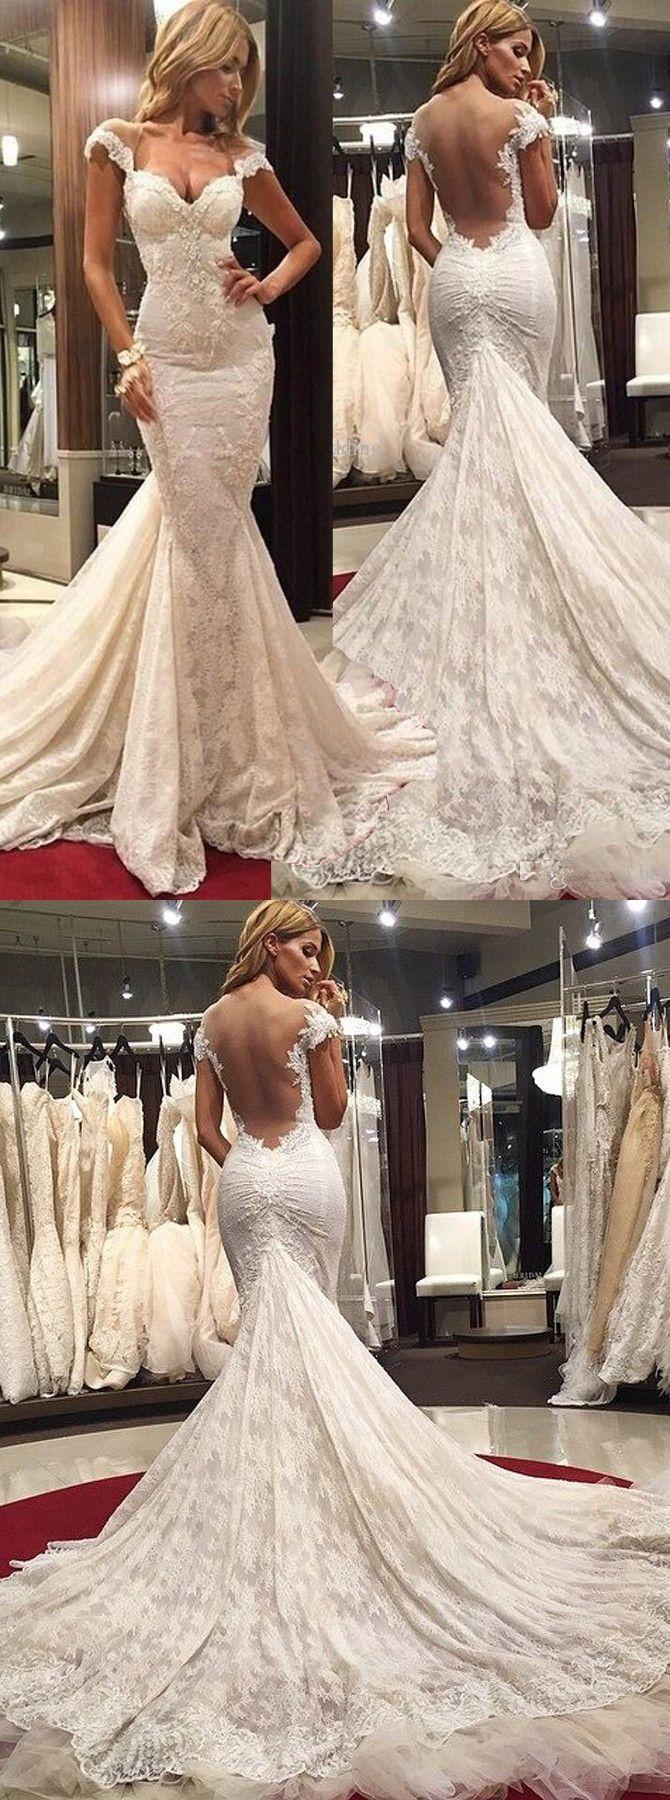 Wedding - Delicate Scoop Illusion Back Cap Sleeves Court Train Lace Mermaid Prom Dress